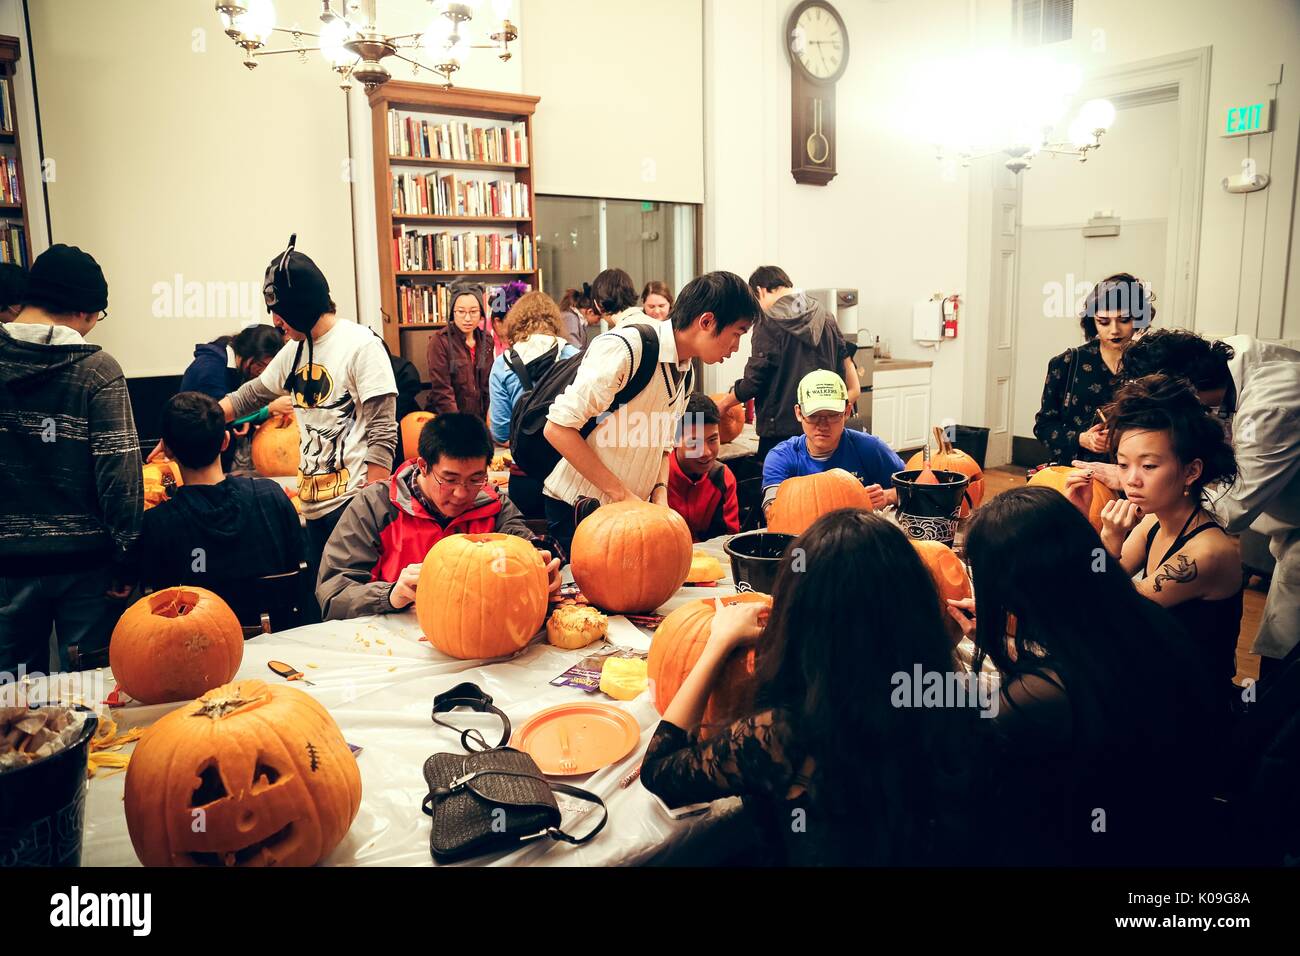 College students are in a room that is dedicated to carving pumpkins, they are all dressed in different costumes and are sitting and standing working on their pumpkins at two long rectangular tables covered in pumpkins, Halloween at Johns Hopkins University's George Peabody Library, 2015. Courtesy Eric Chen. Stock Photo